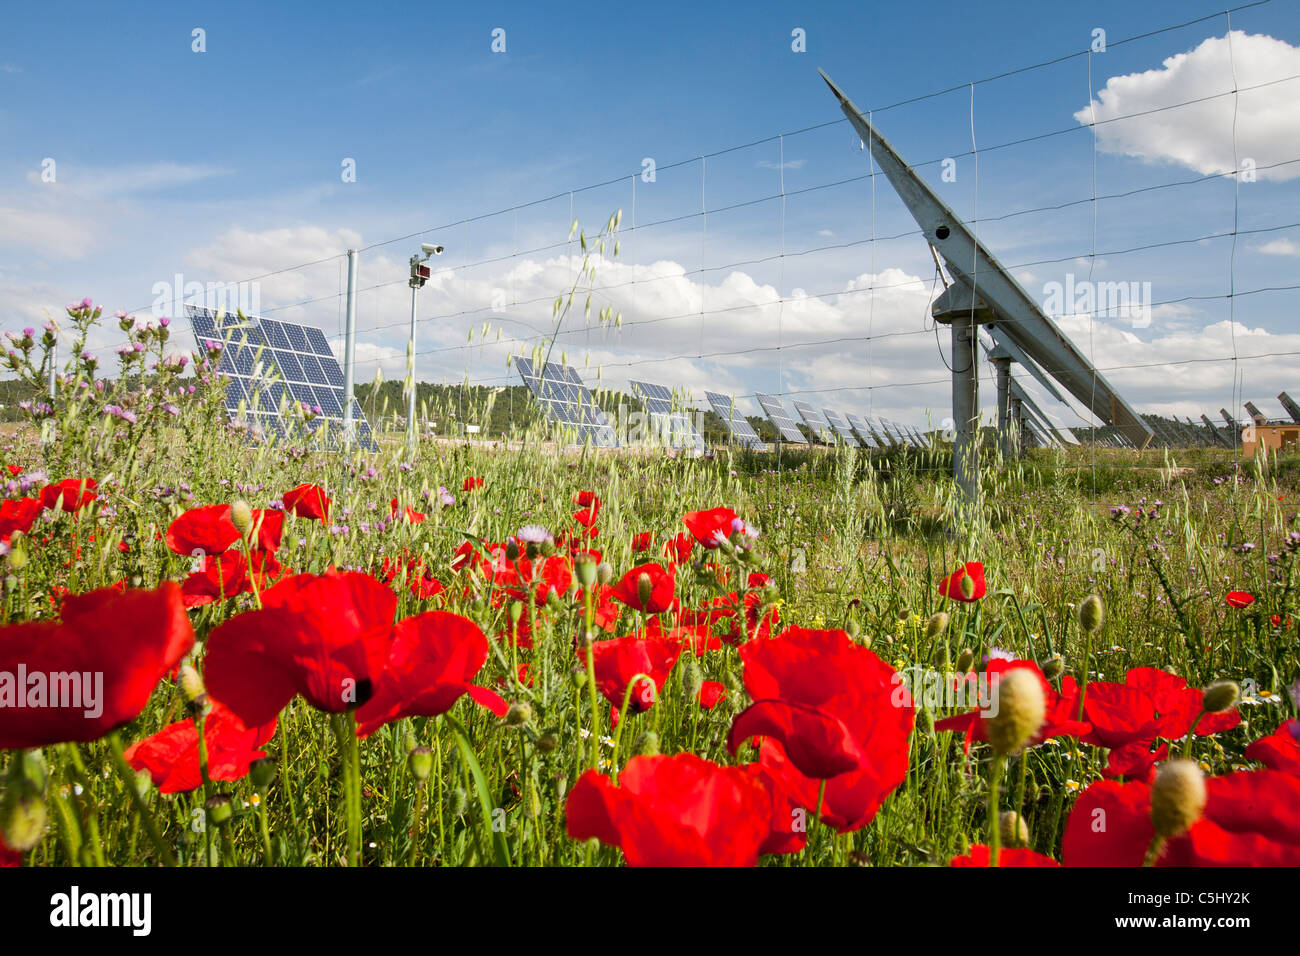 A photo voltaic solar power station near Caravaca, Andalucia, Spain, with wild flowers. Stock Photo